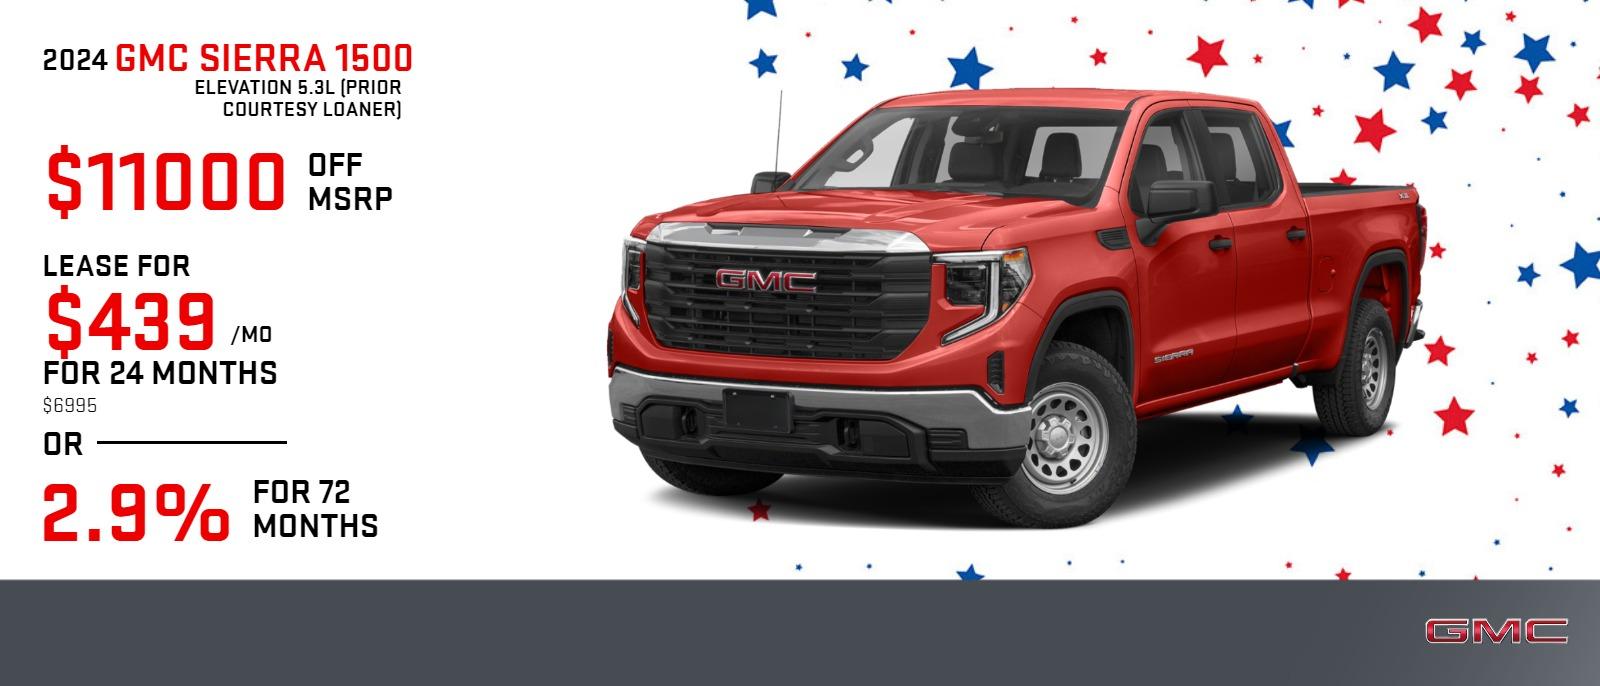 2024 SIERRA 1500 ELEVATION 5.3L (PRIOR COURTESY LOANER)
$439 | 24 MONTHS | $6995
SAVE UP TO $11000 OFF MSRP
2.9% APR FINANCING FOR UP TO 72 MONTHS